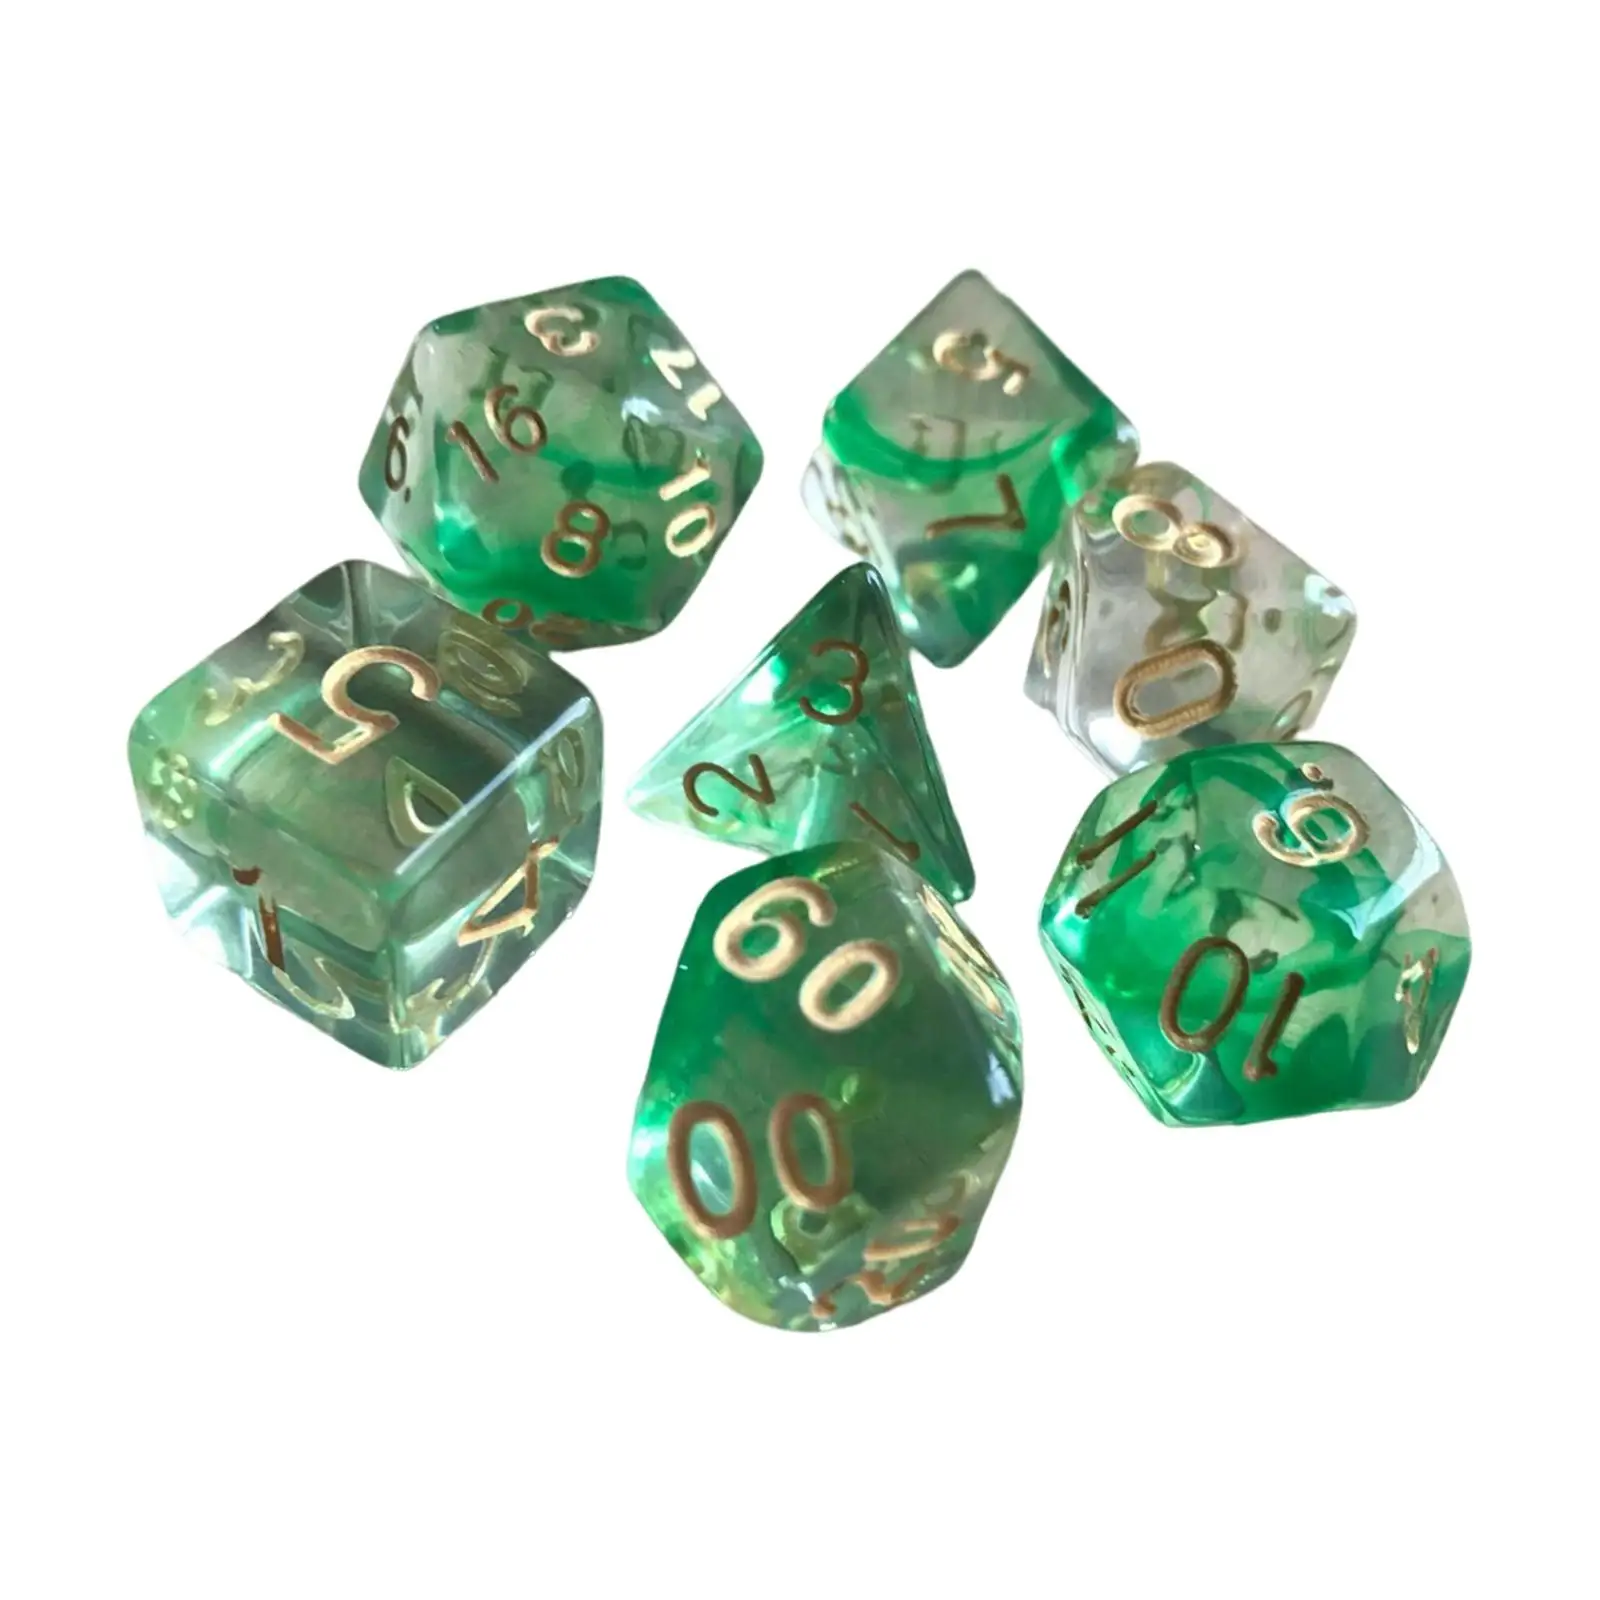 7Pcs Acrylic Polyhedral  D4-D20 Party Game Play Entertainment Toy 